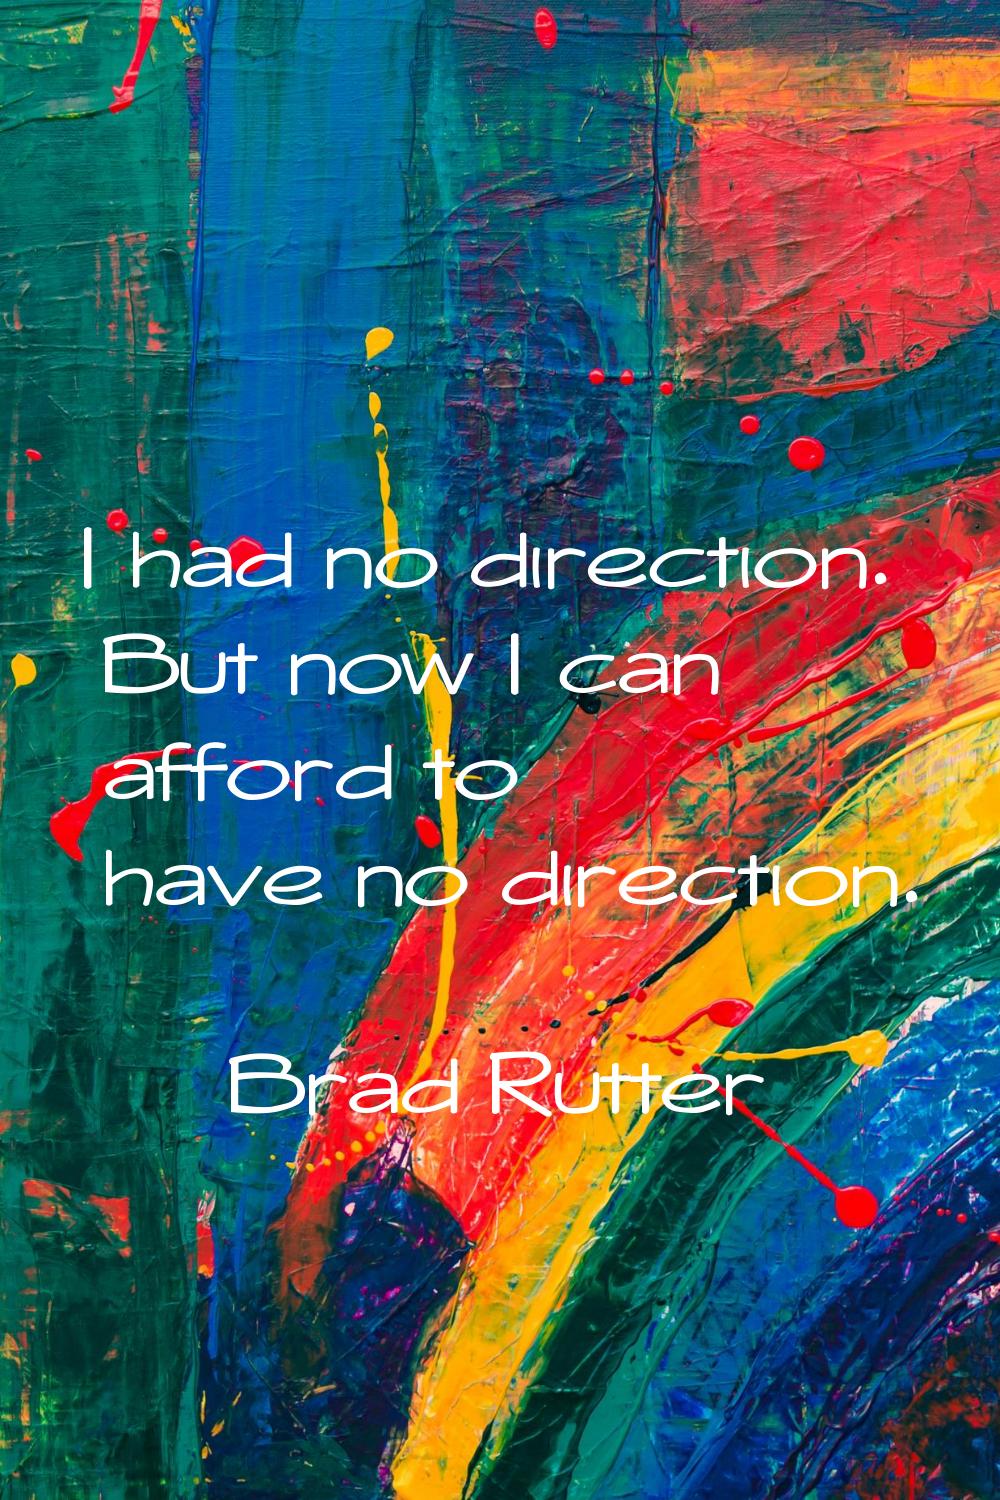 I had no direction. But now I can afford to have no direction.